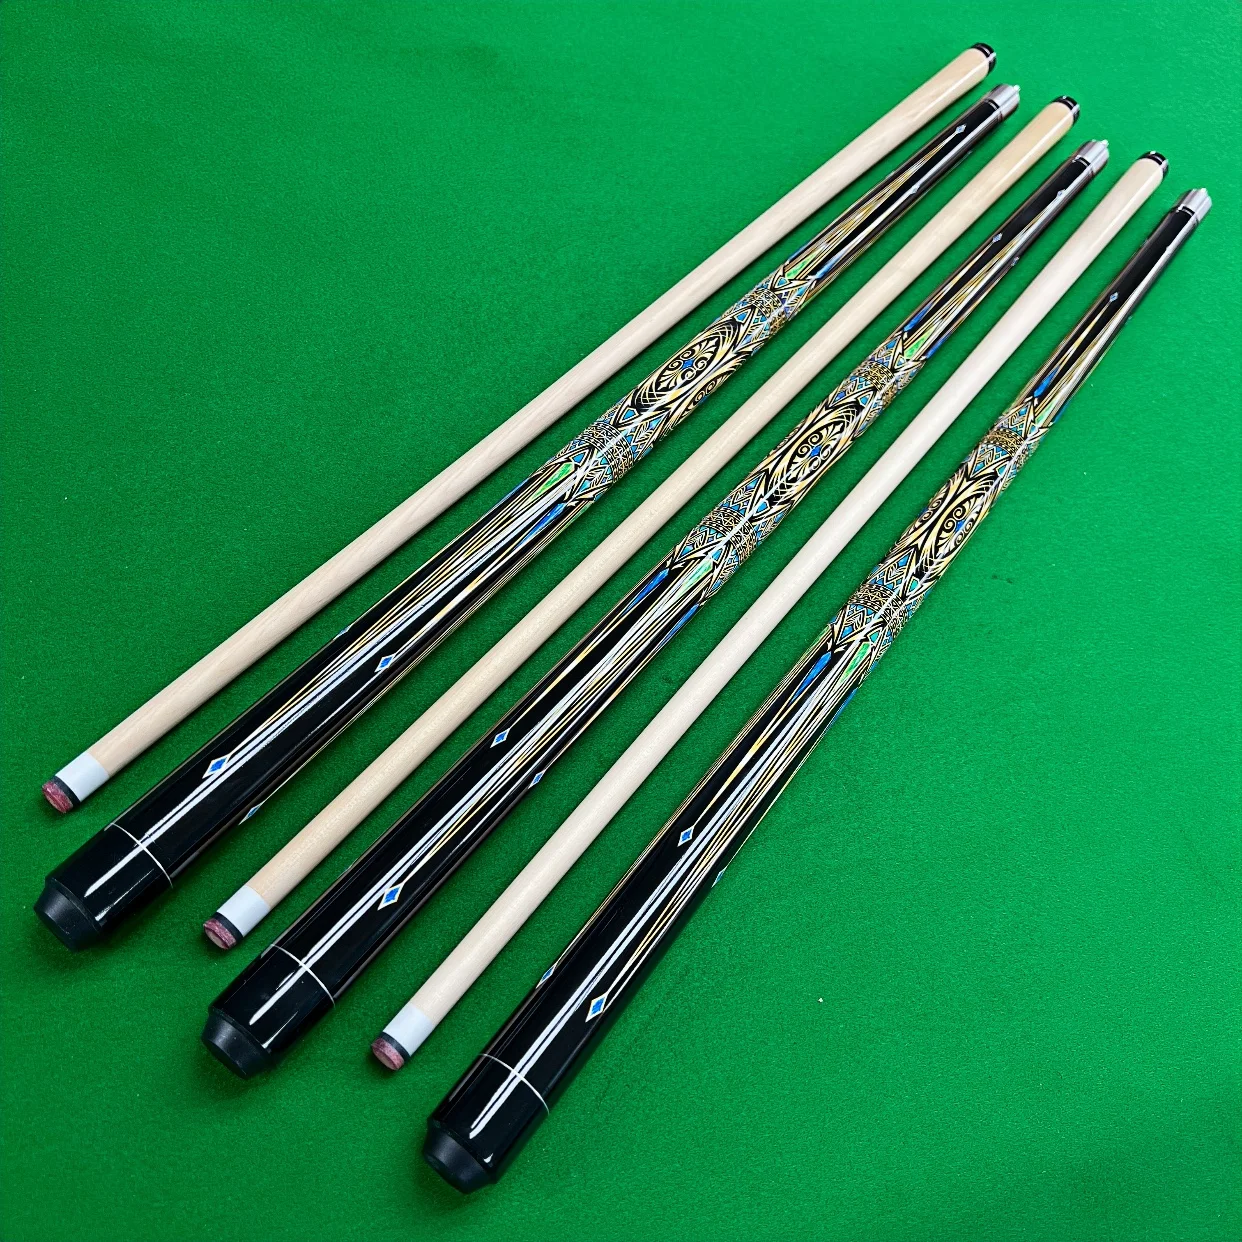 

Premium Maple Pool Cue with Colorful Leather Tip - High Definition Digital Printing and Precision Strike for Supreme Ball Contro